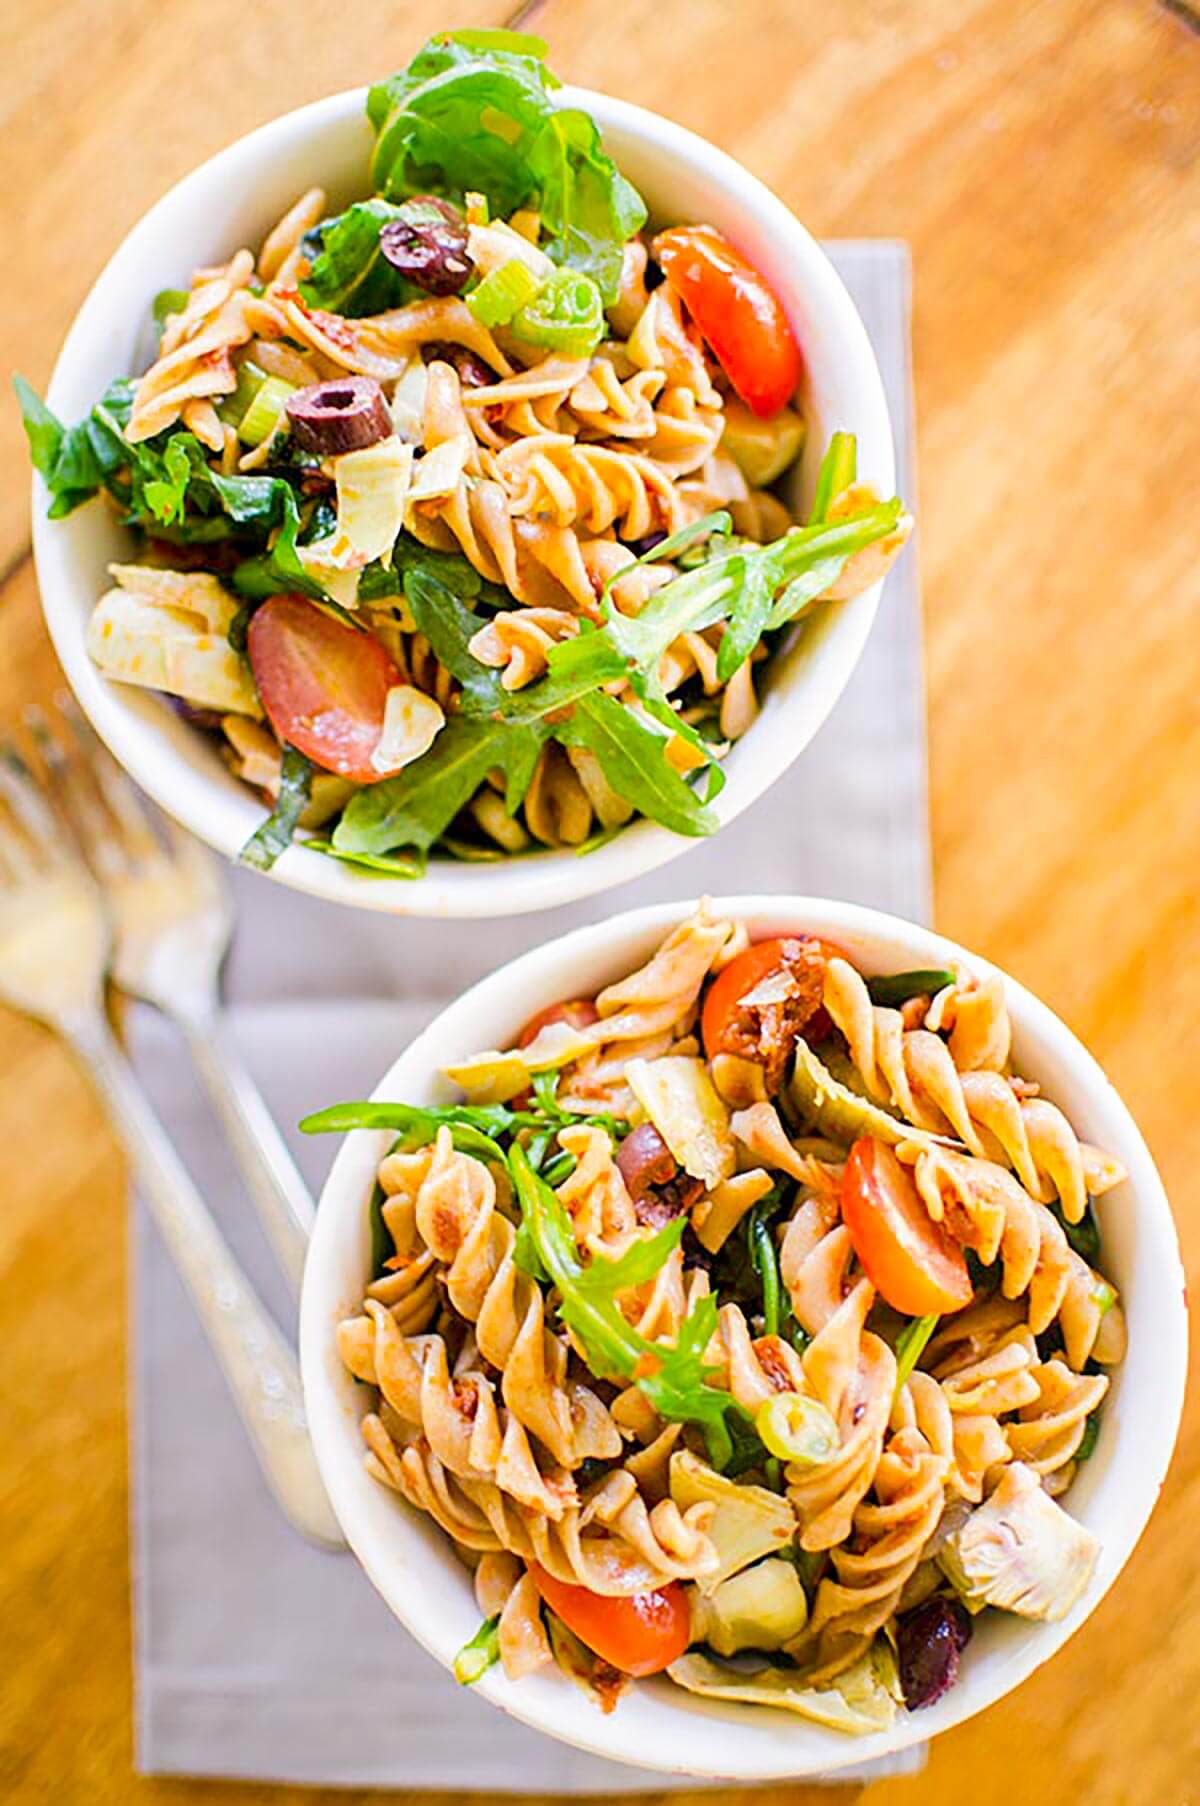 Two servings of pasta salad in white bowls